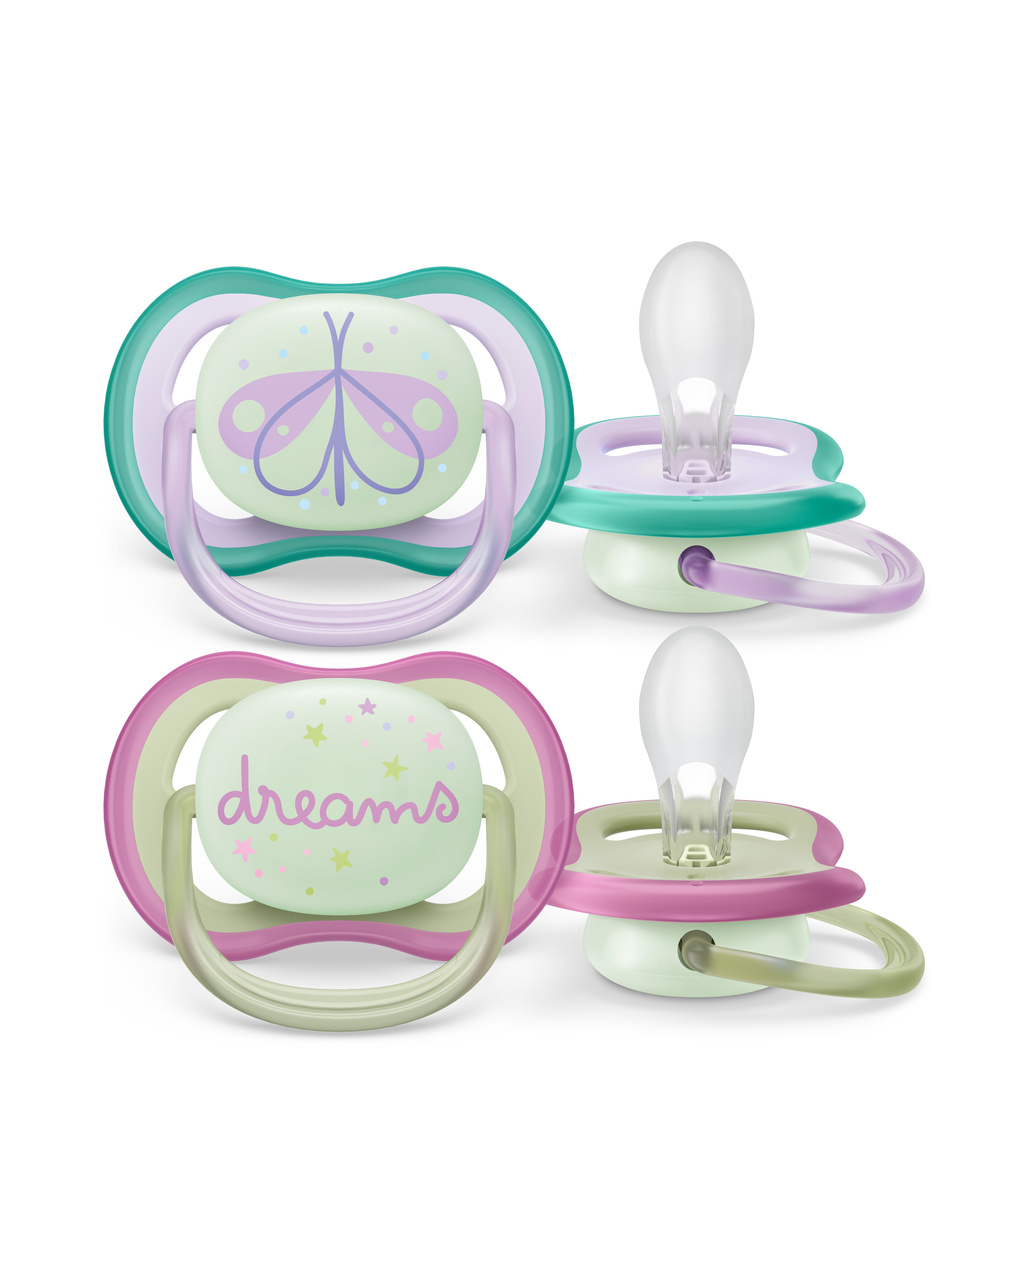 2 Chupetes Philips AVENT Ultra Soft Decorados 6-18 Meses